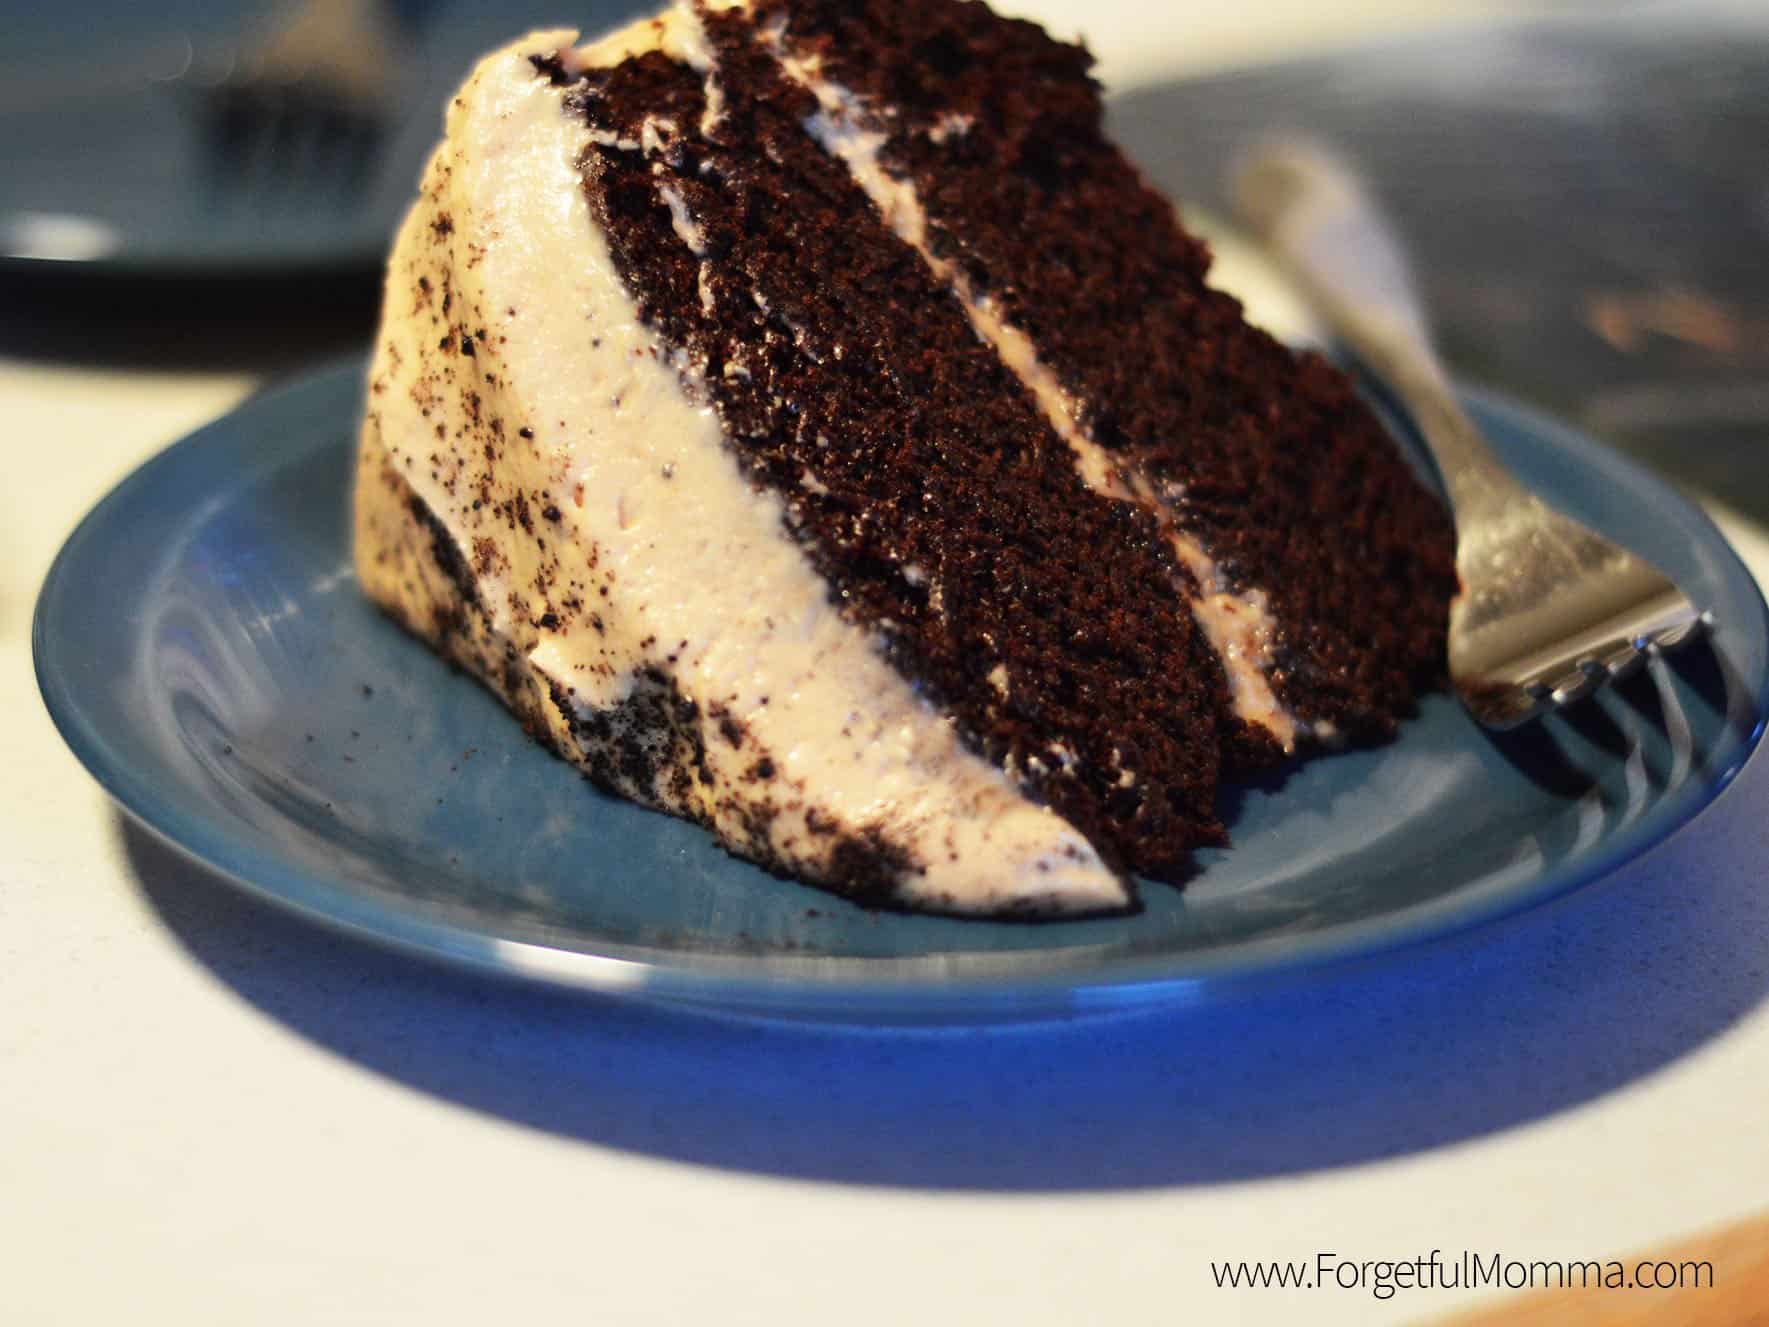 Chocolate Coffee Cake with Peanut Butter Frosting